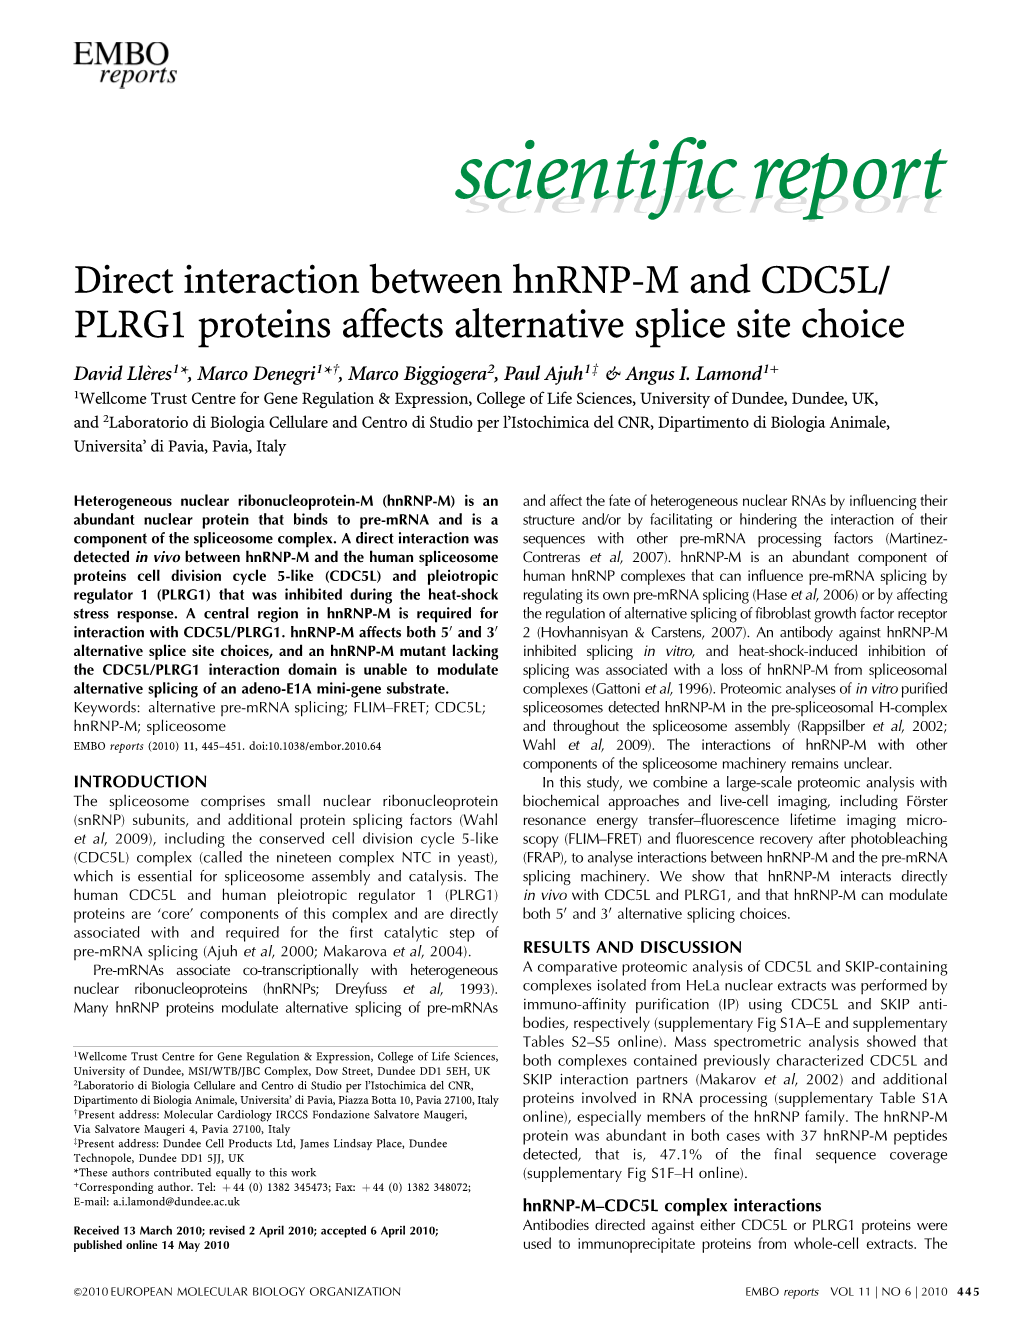 Direct Interaction Between Hnrnp-M and CDC5L/PLRG1 Proteins Affects Alternative Splice Site Choice